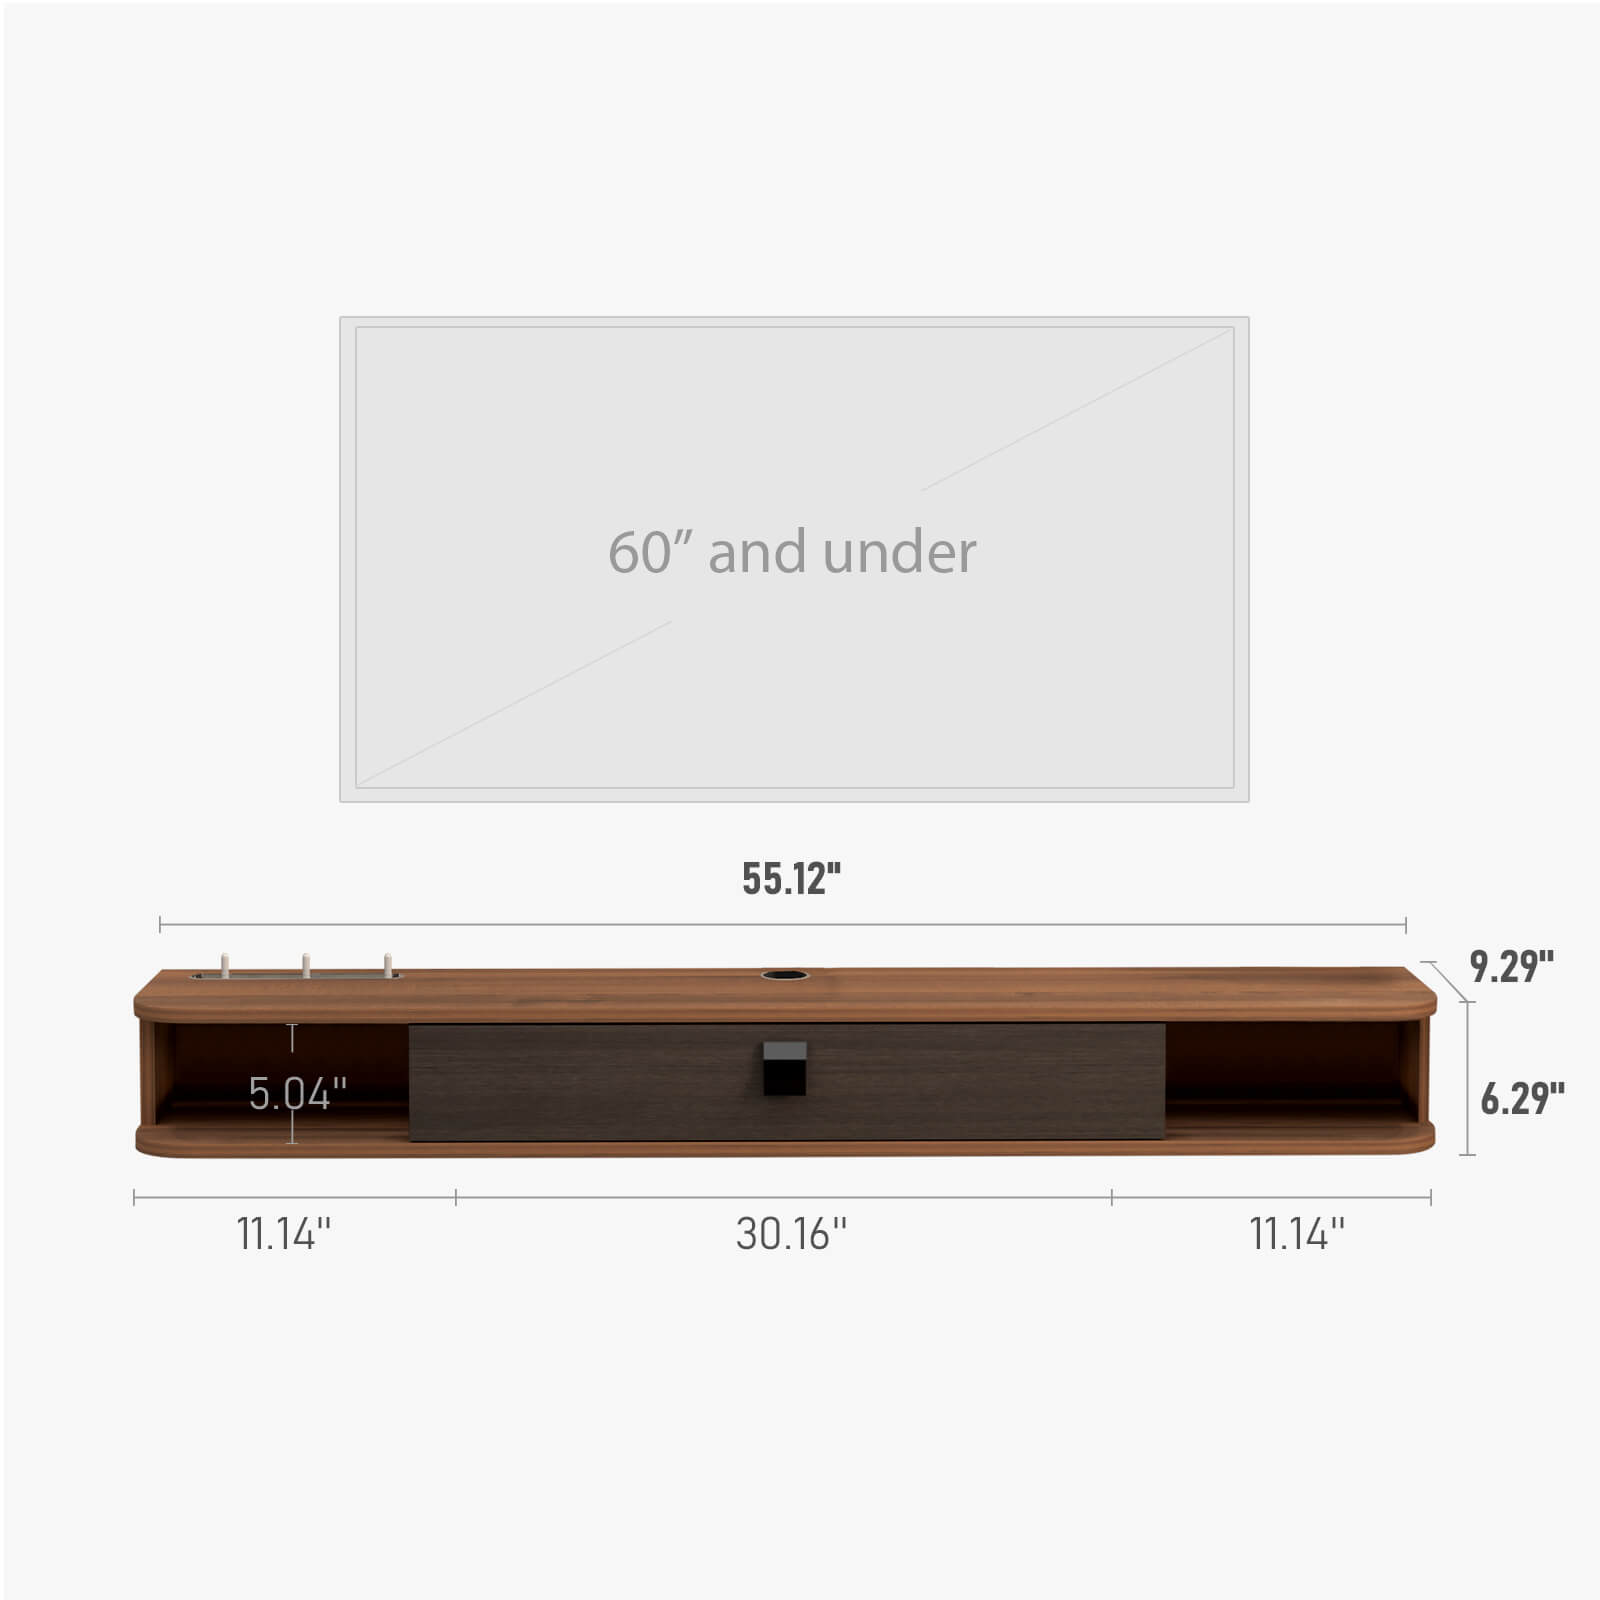 55.12" Walnut Plywood Slim Floating TV Stand for 55" 60" TV